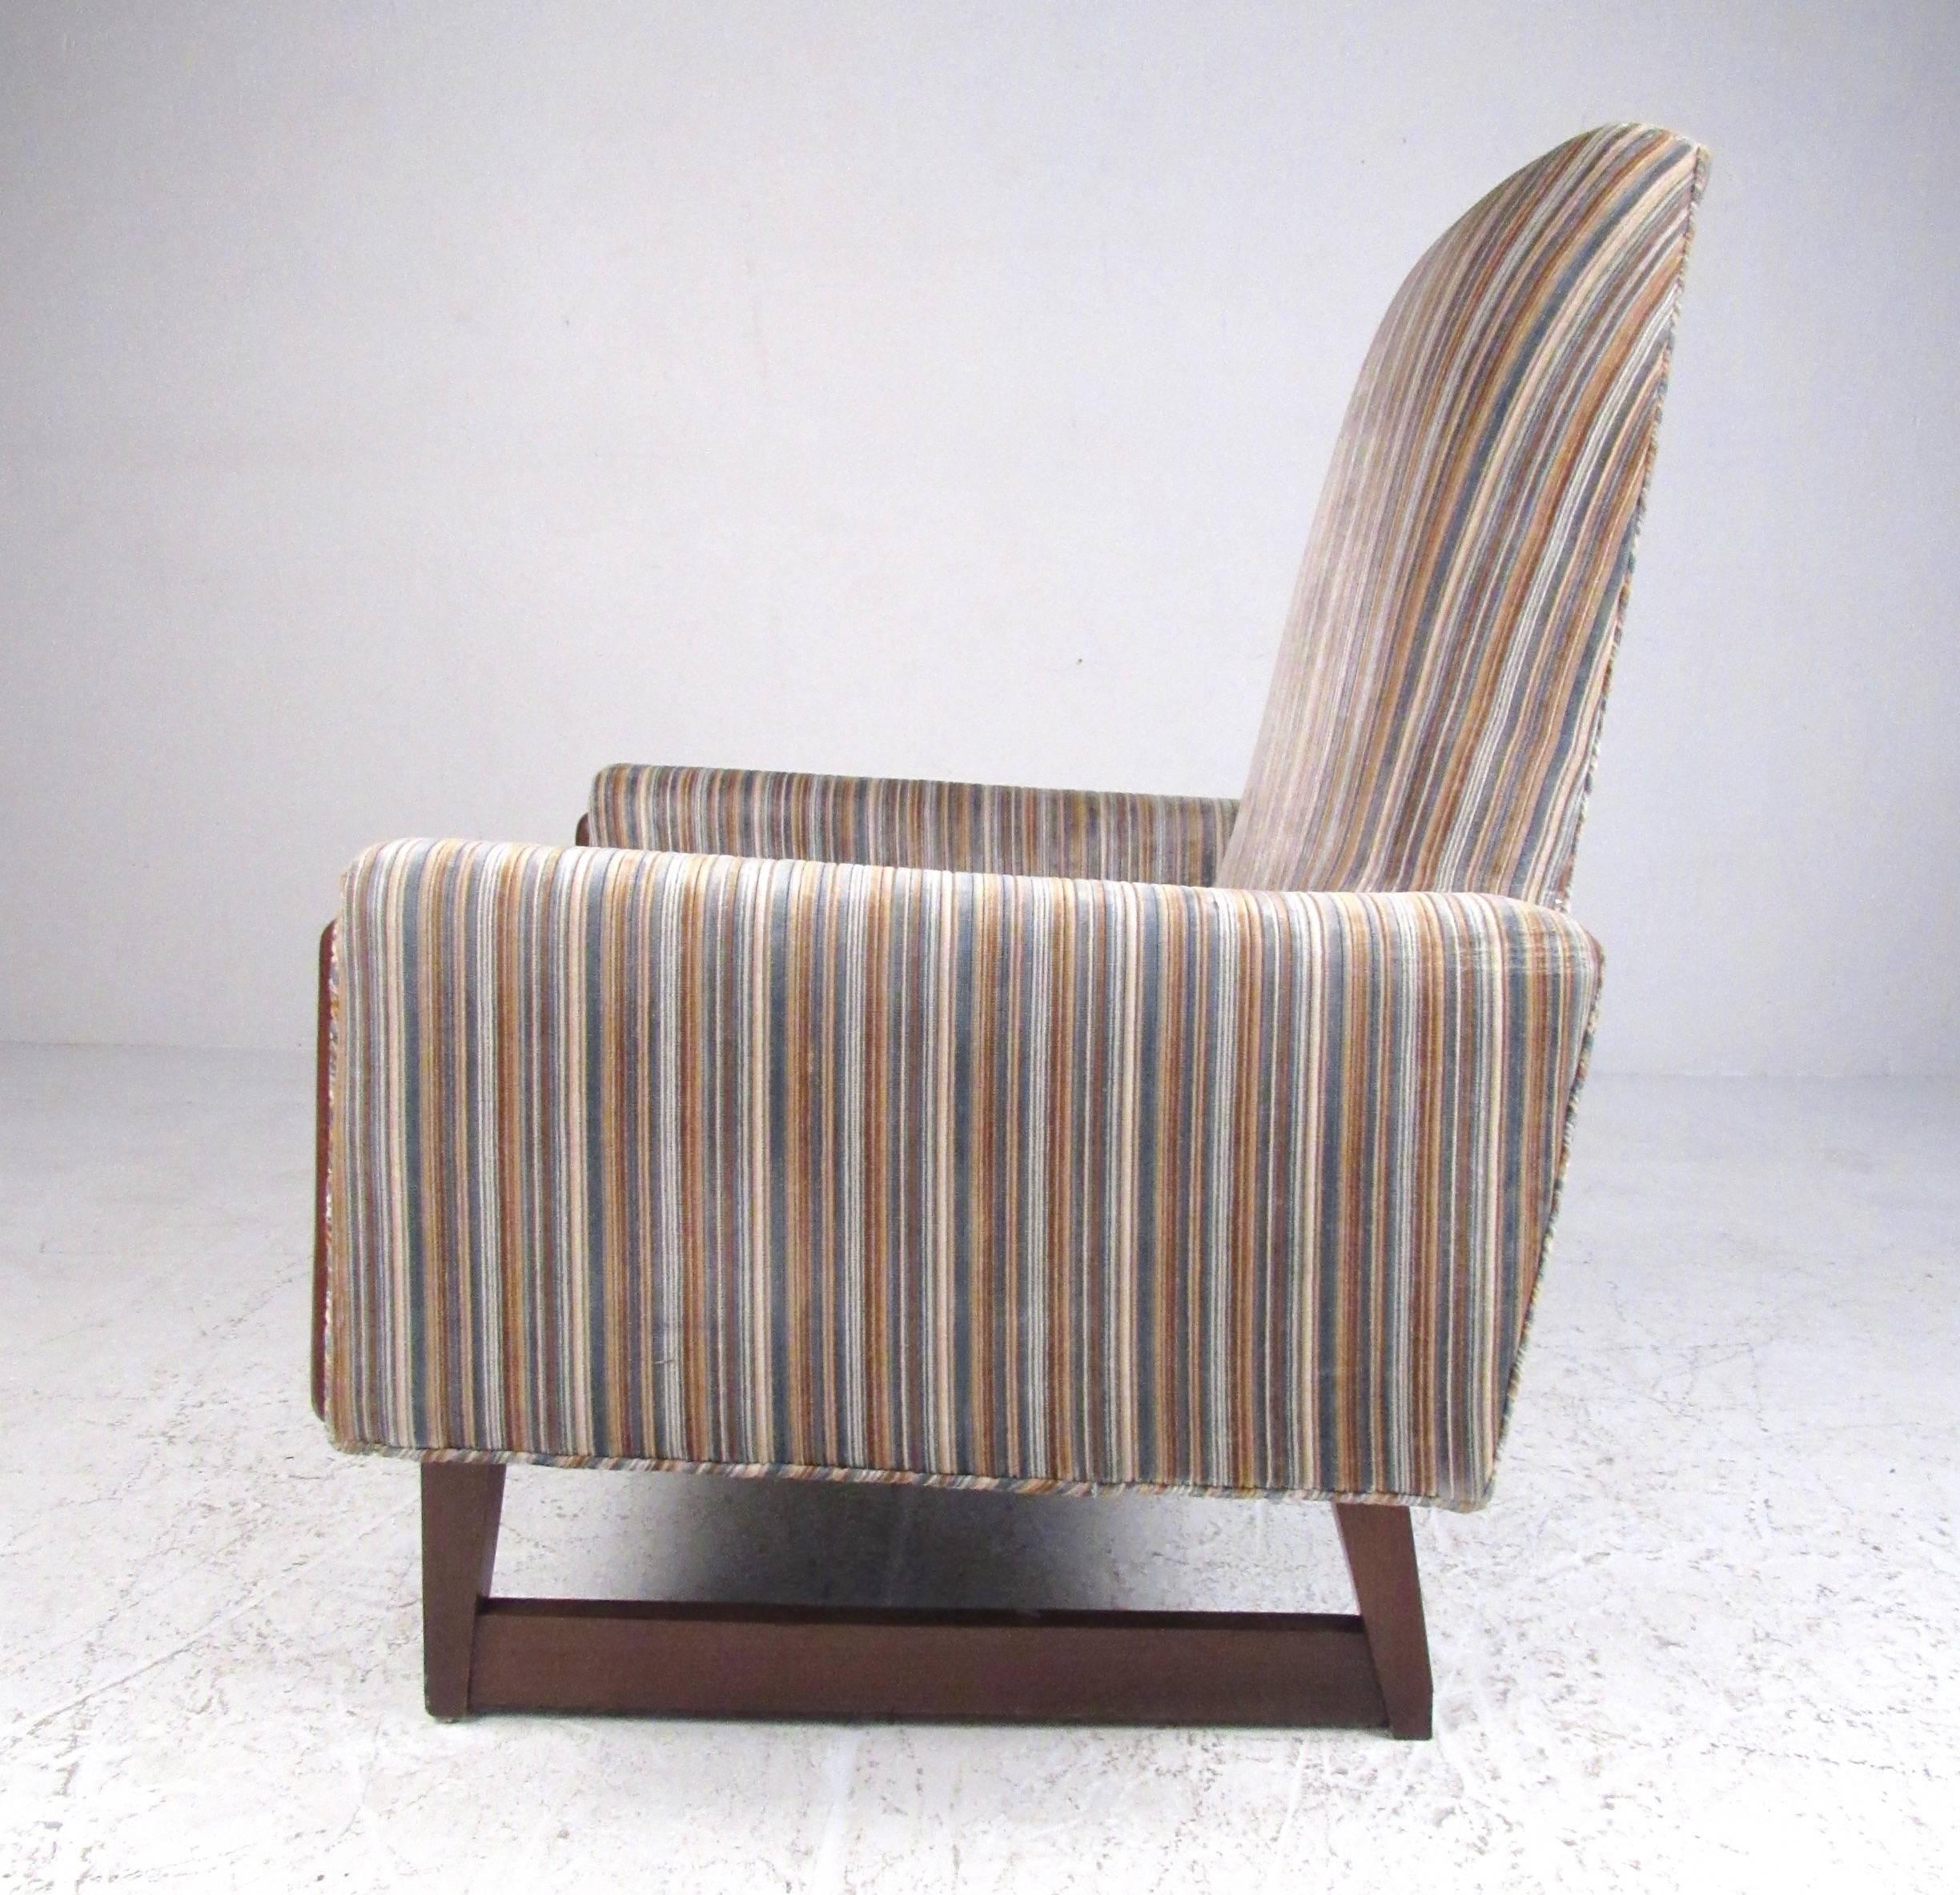 This unique vintage lounge chair features a high sculpted back, unique walnut trim, and vintage striped fabric. Sled style legs add to the Mid-Century Modern appeal of this Adrian Pearsall style chair. Please confirm item location (NY or NJ).